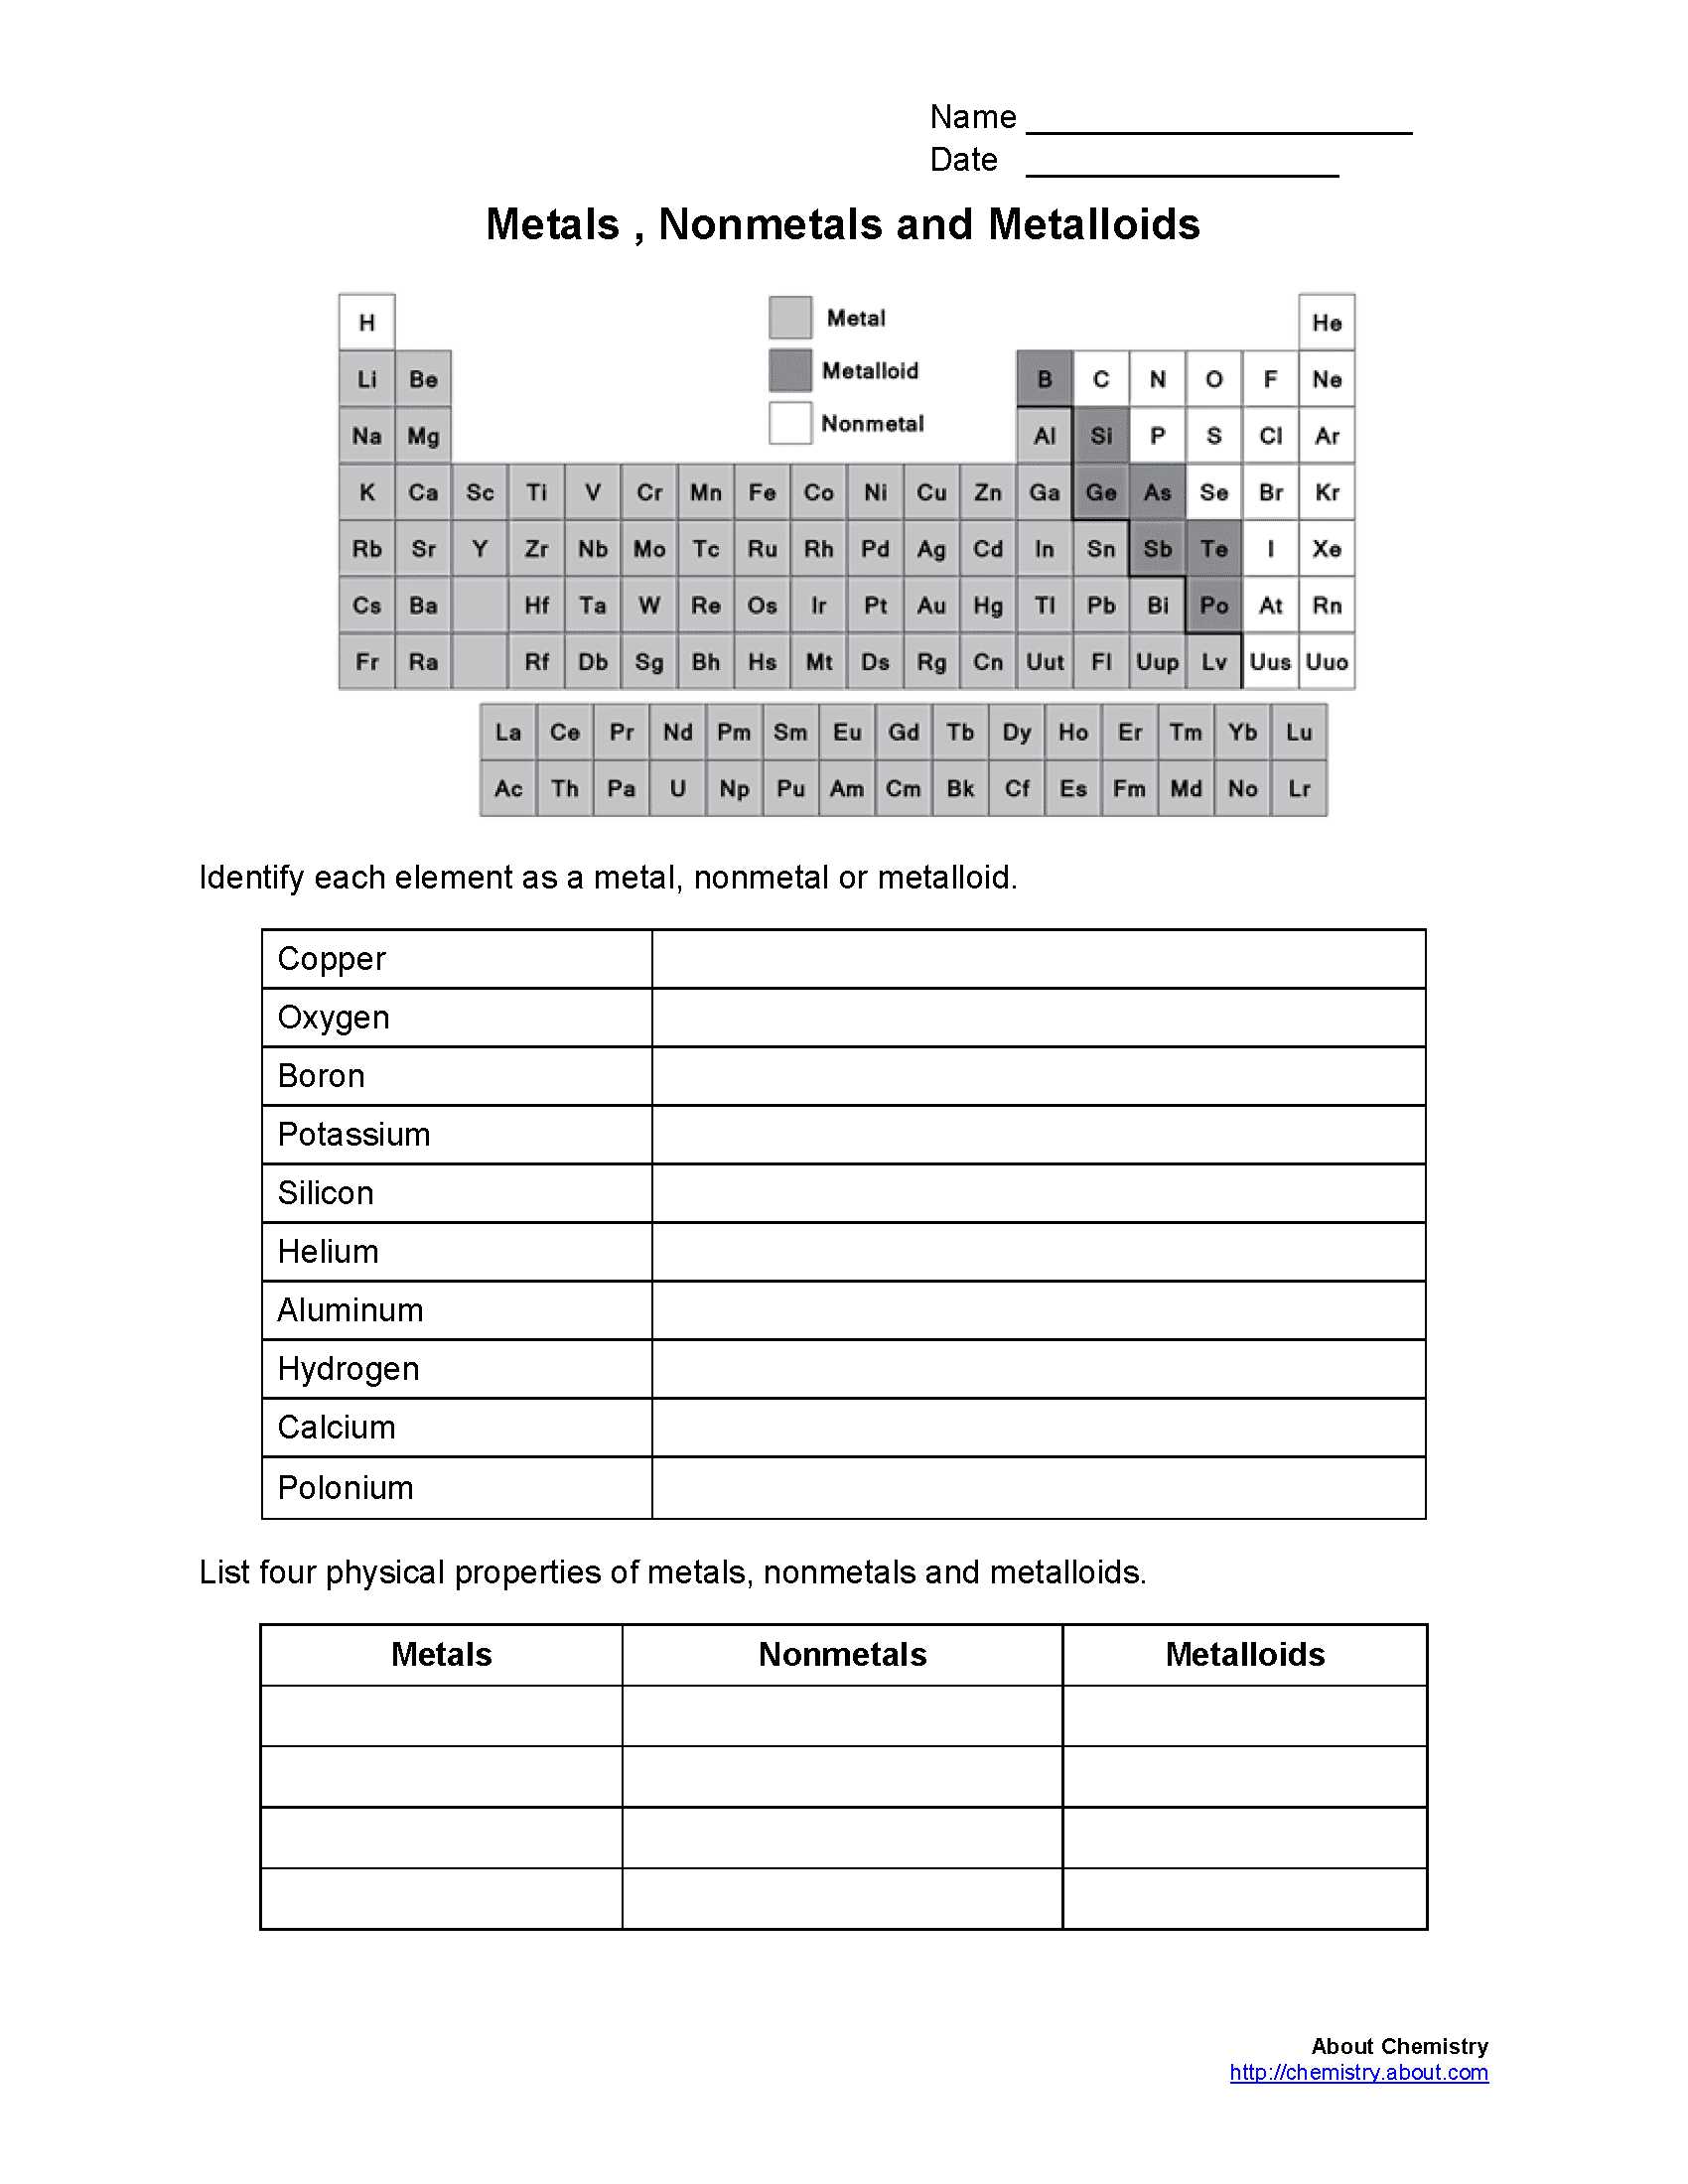 Chemical Reaction Worksheet Answers with Metals Nonmetals Metalloids Worksheet